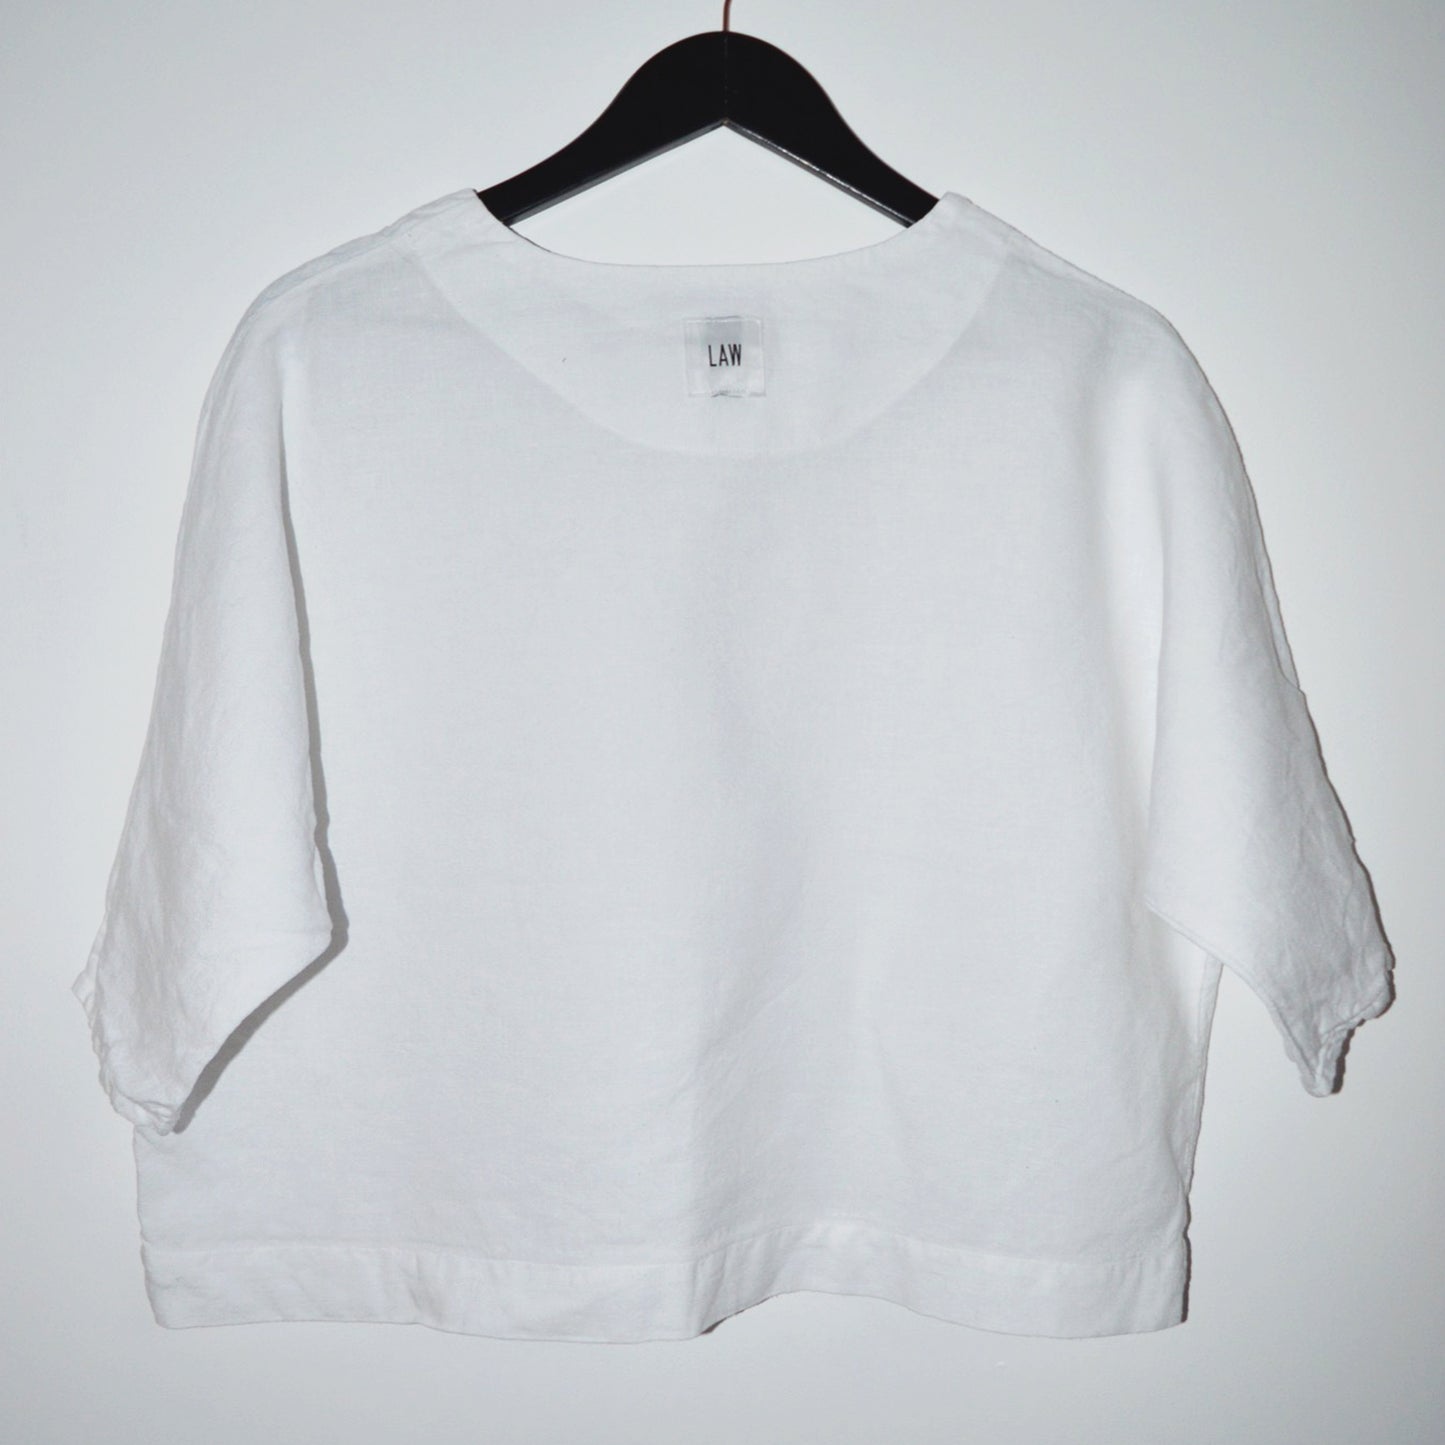 'Olivia' Oversized linen top size S | Pre-loved